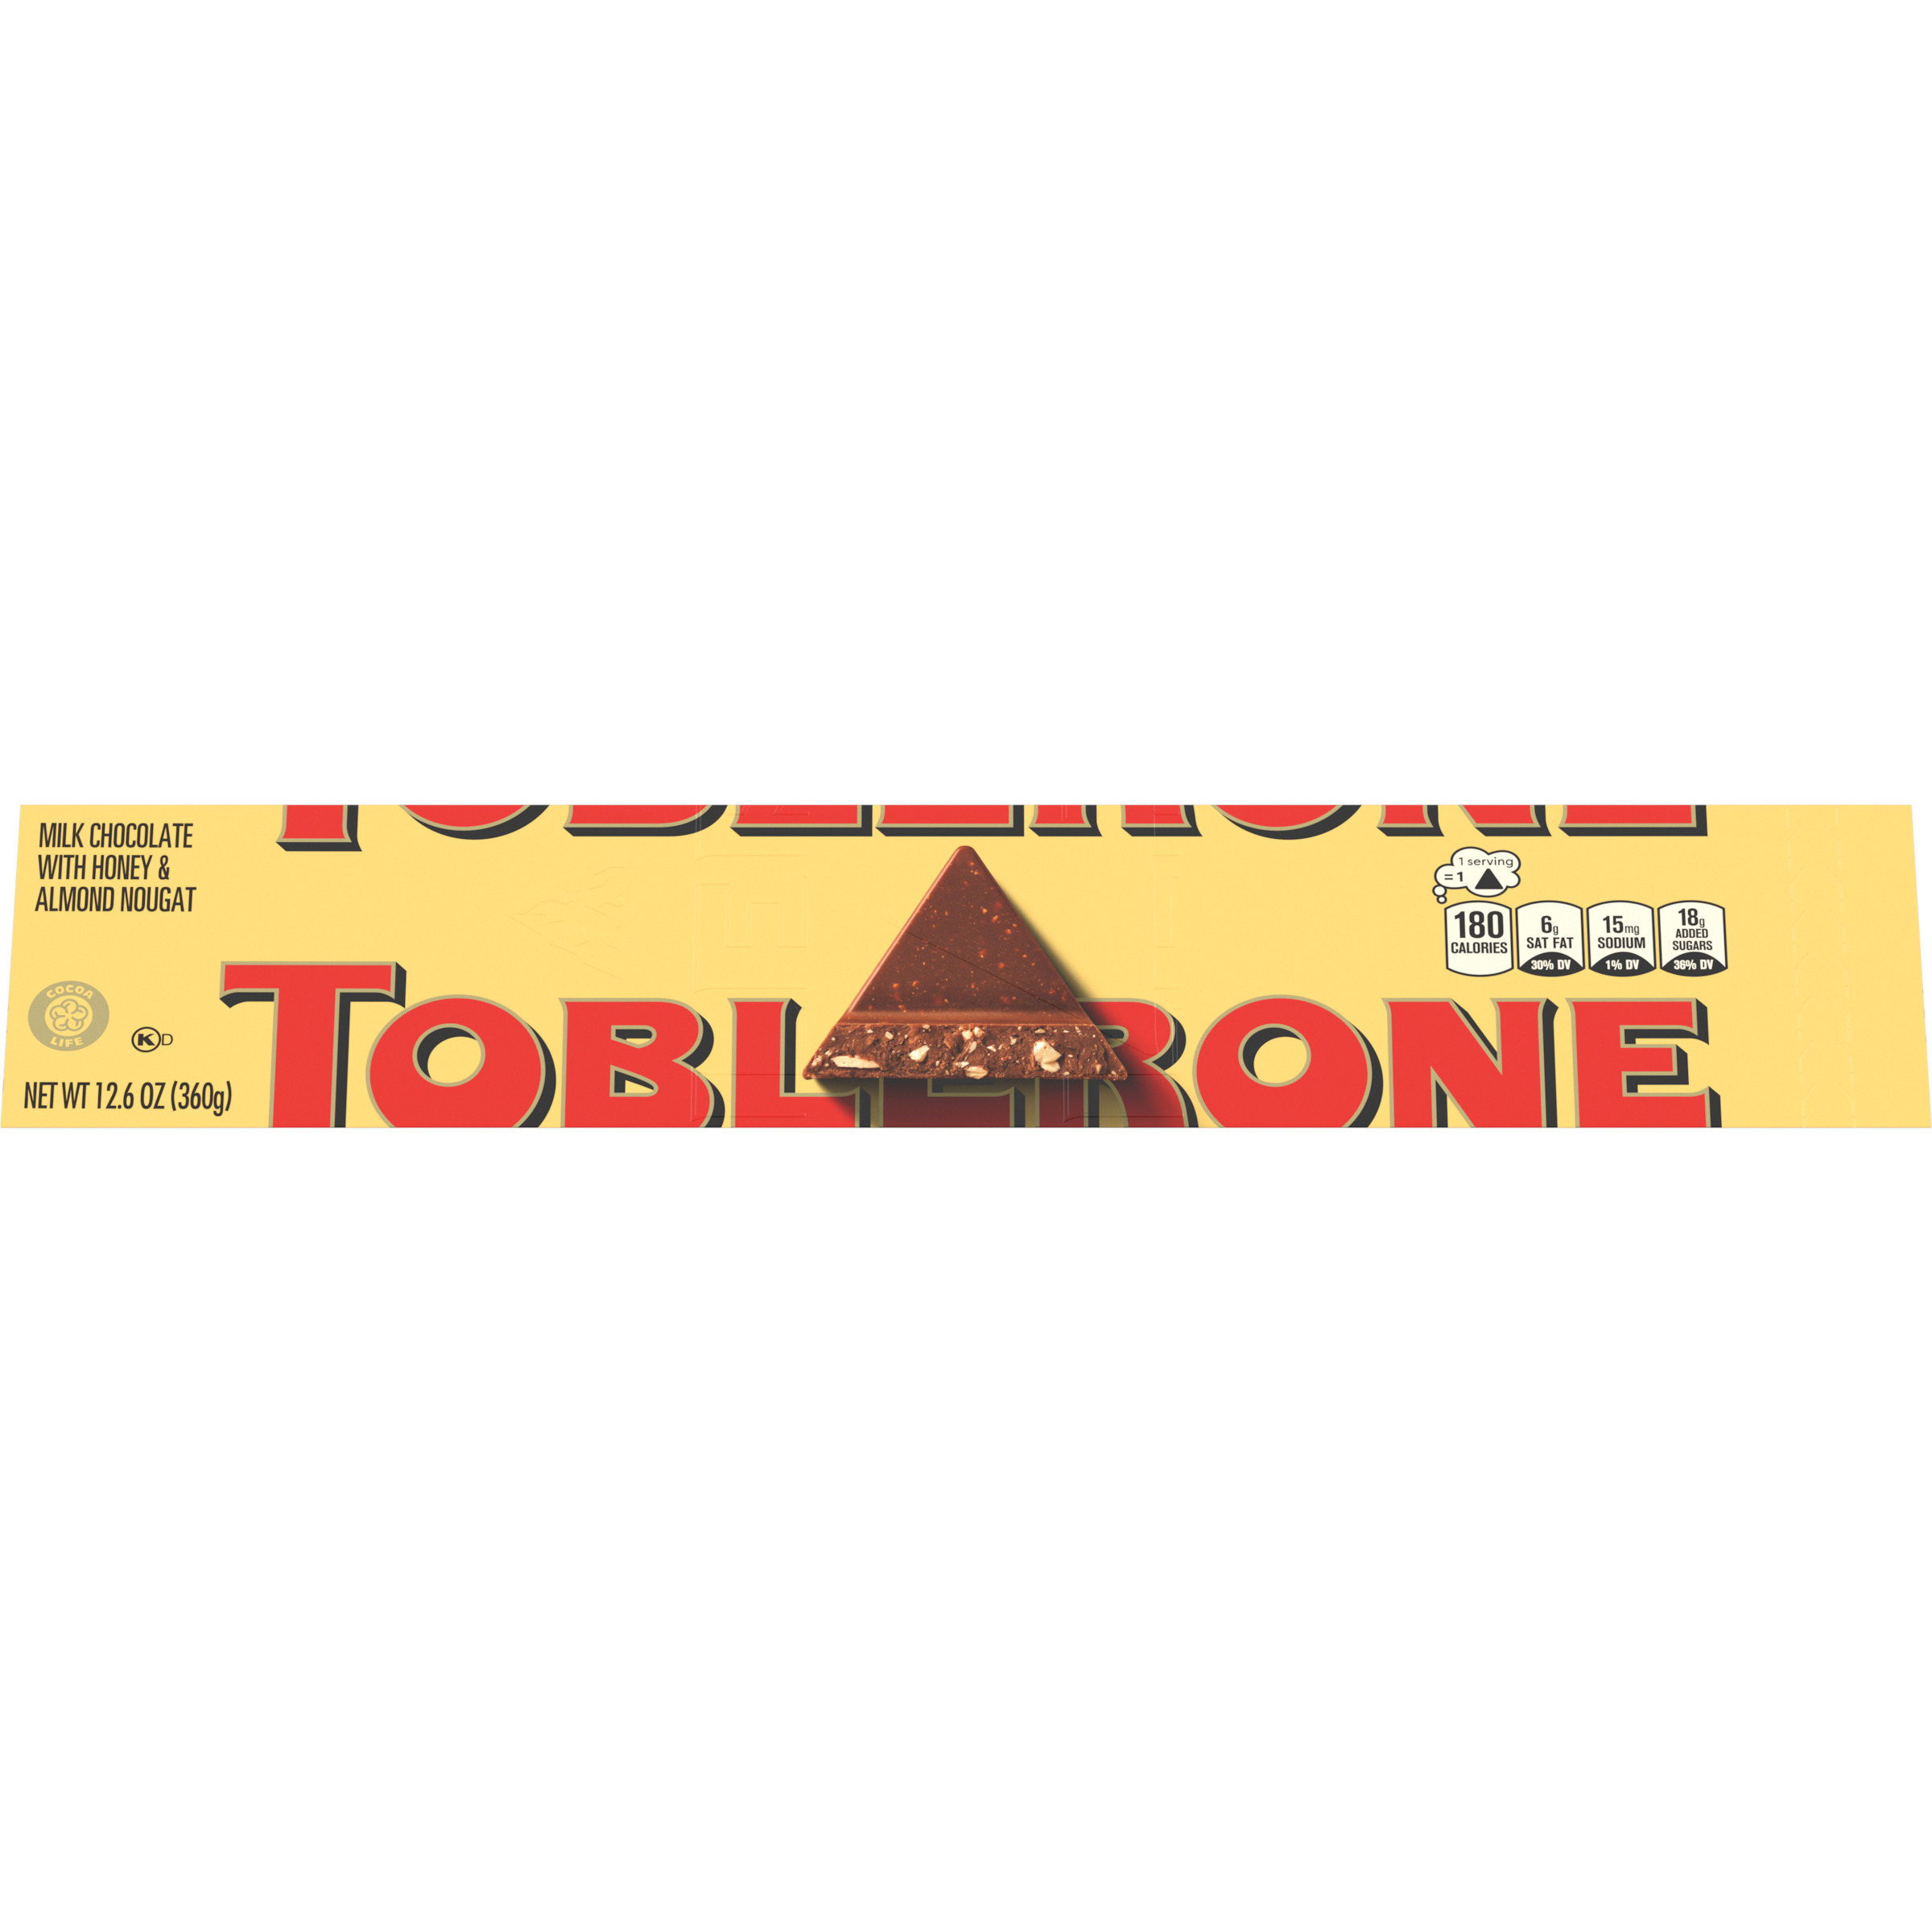 Toblerone Swiss Milk Chocolate Candy Bar with Honey and Almond Nougat, 12.6 oz-5